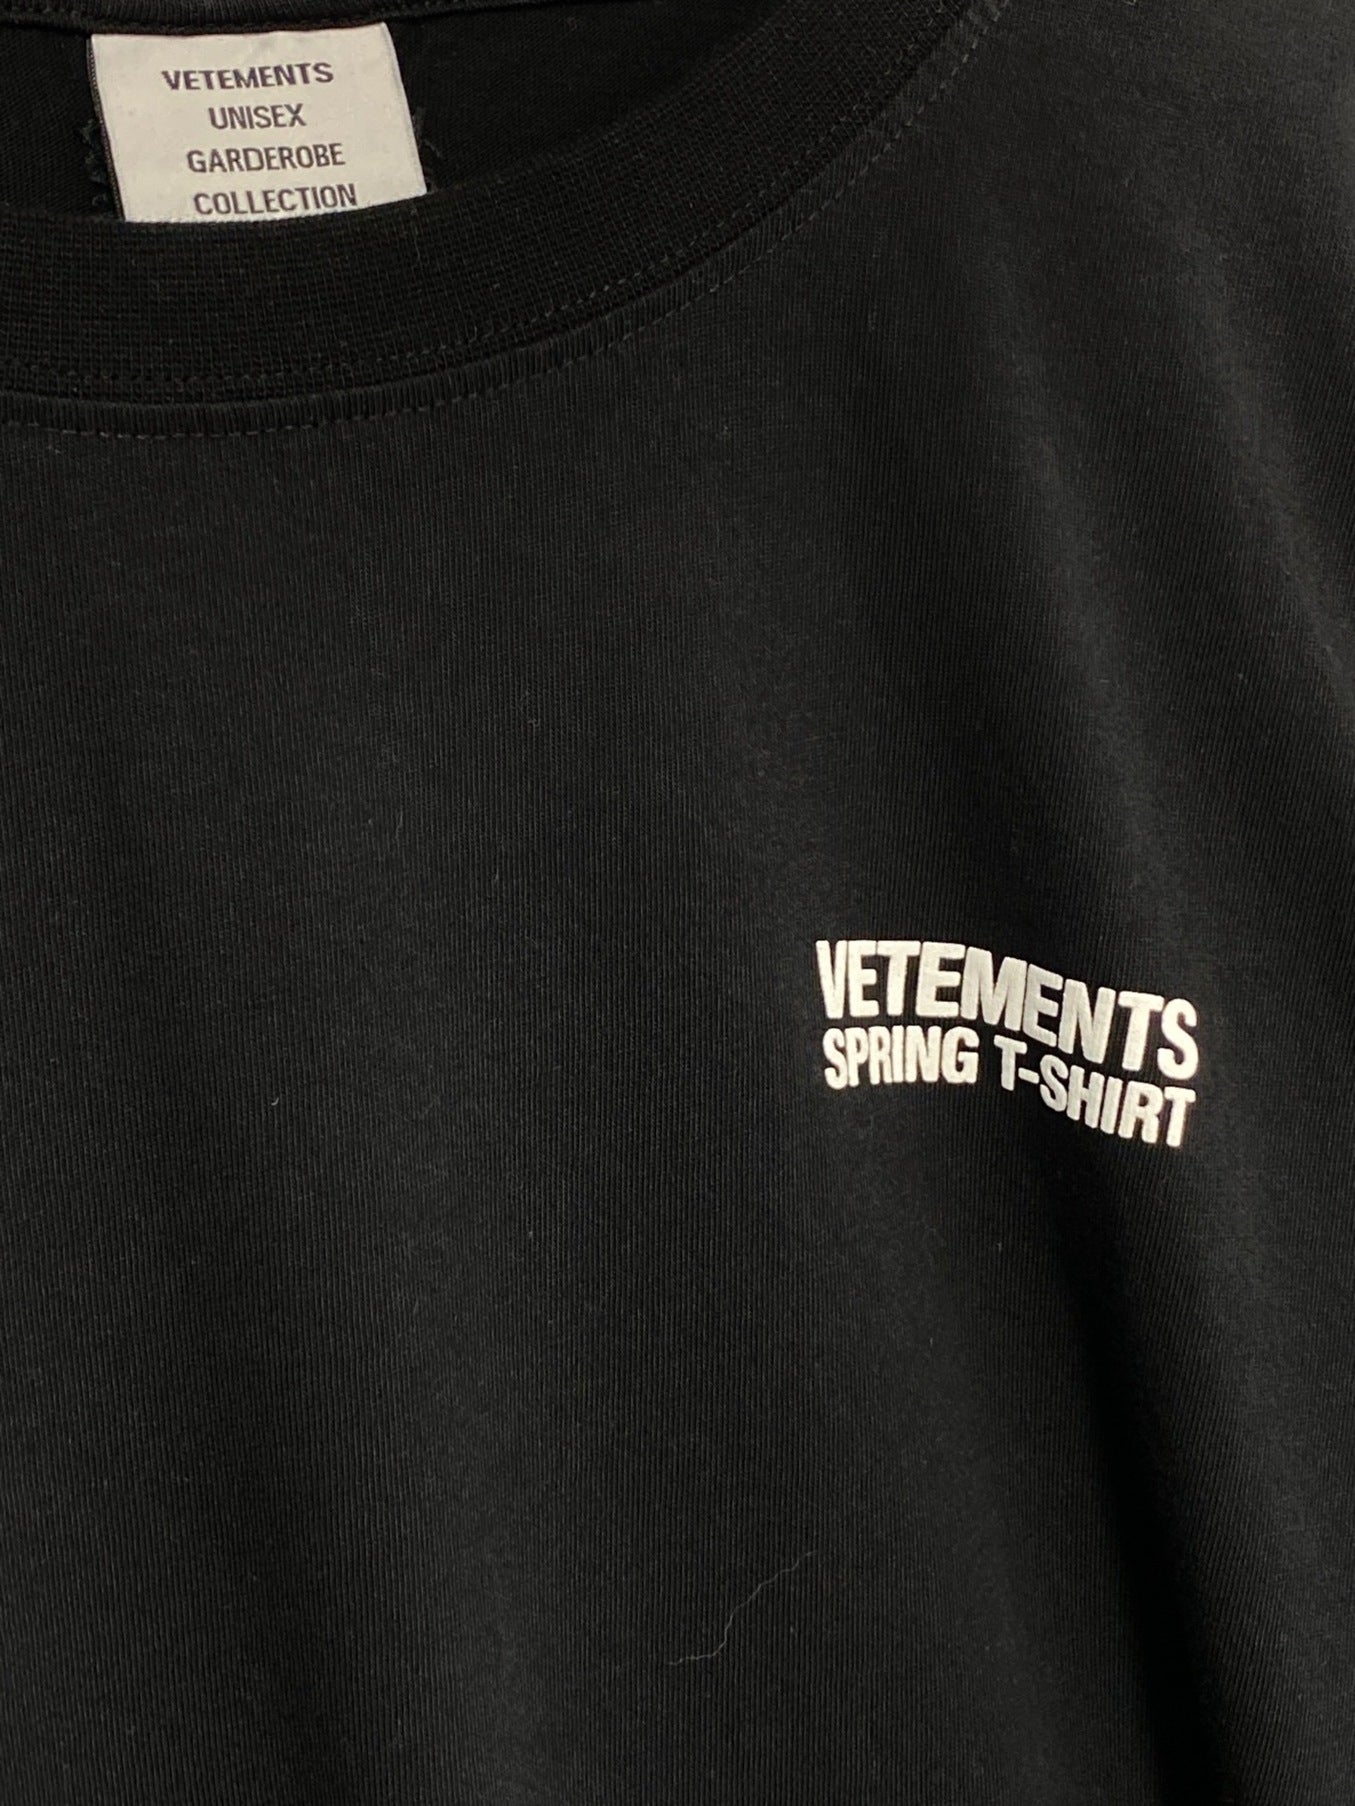 VETEMENTS x Four Seasons Limited Spring T-Shirt